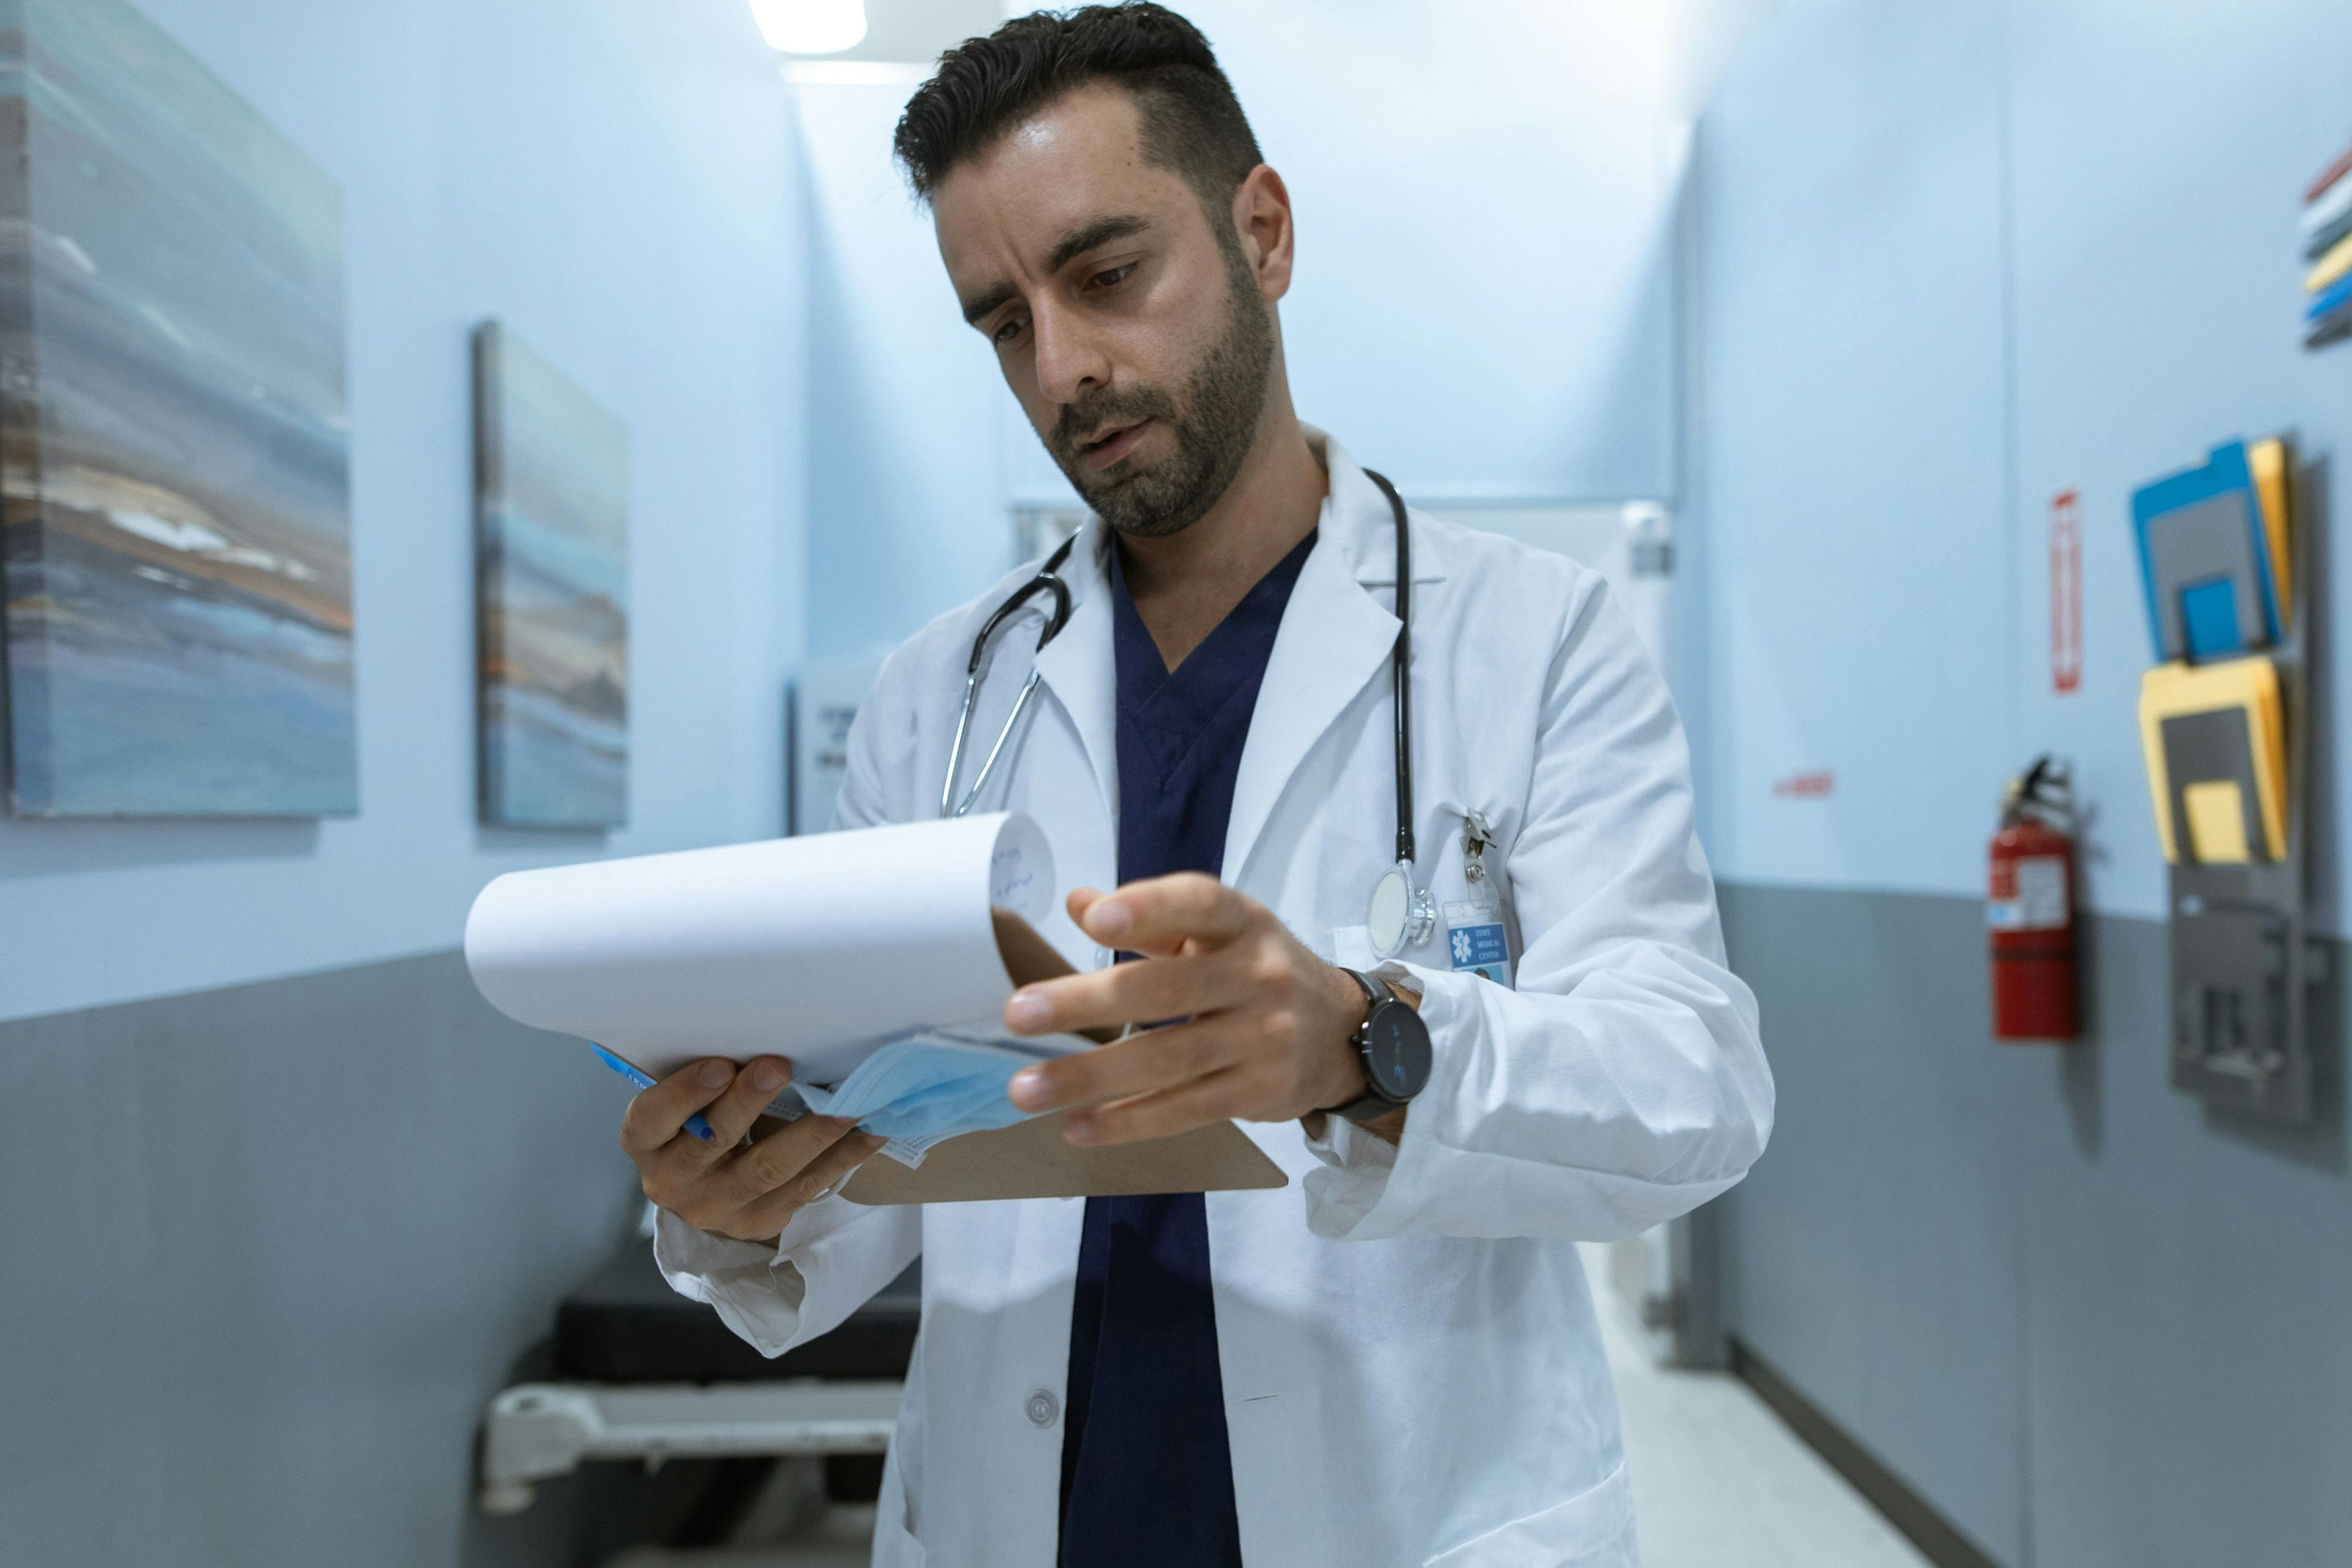 Medical Students Have Higher Rates of Irritable Bowel Syndrome